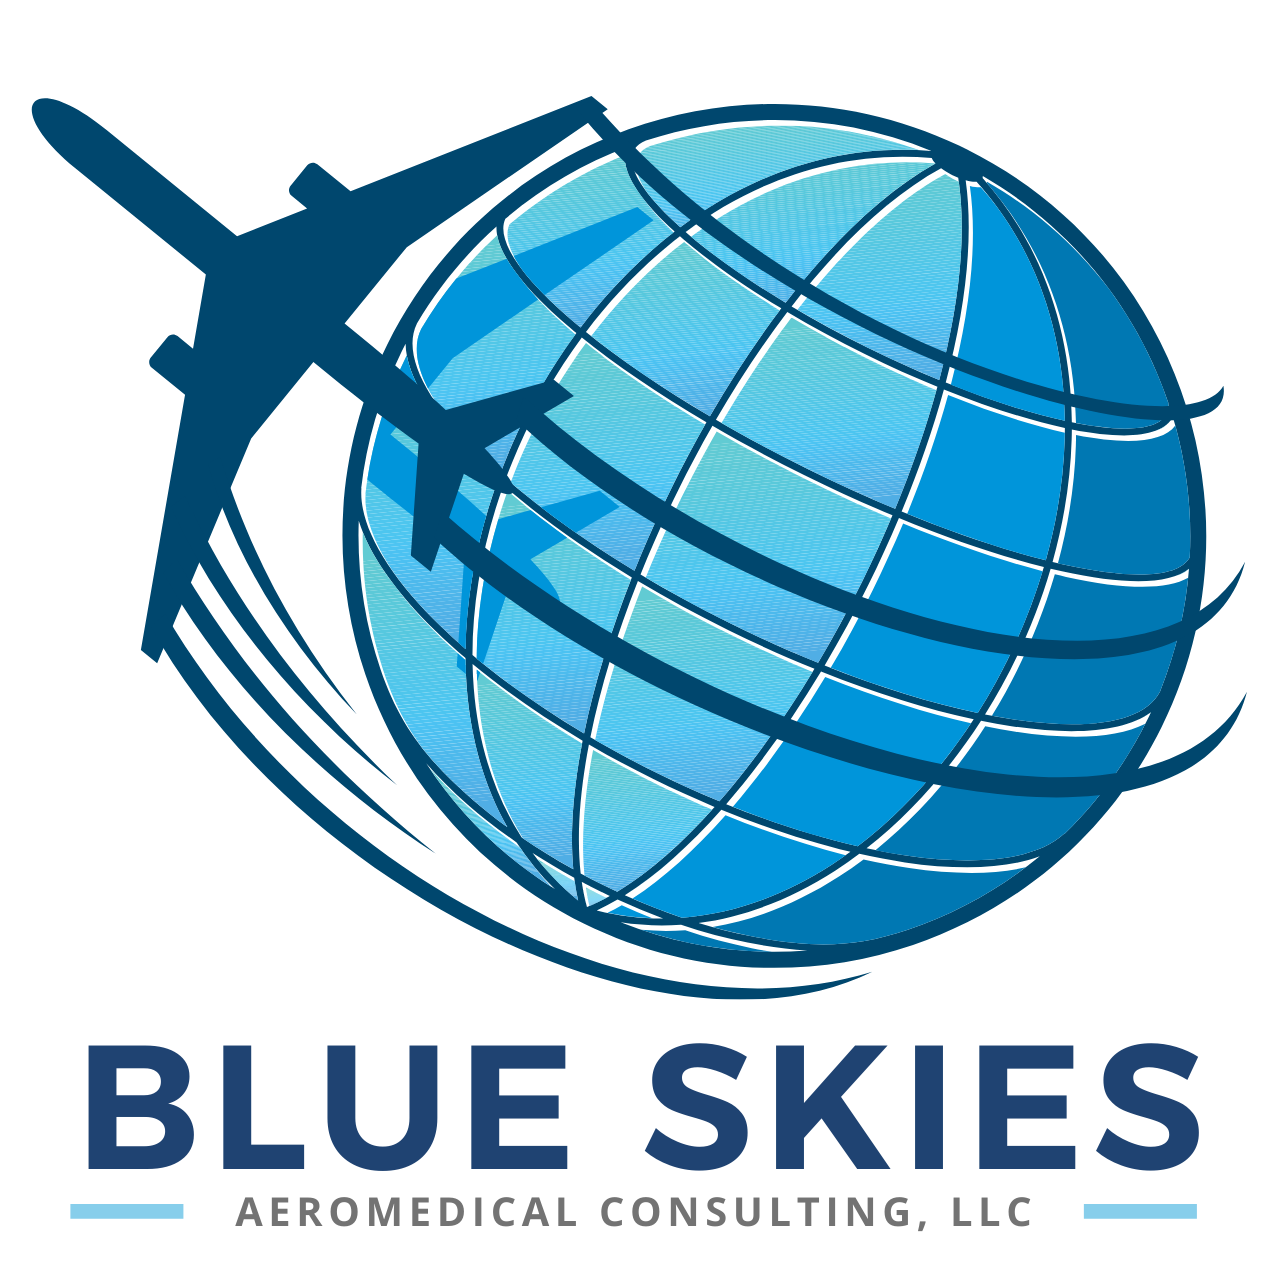 Blue Skies Aeromedical Consulting